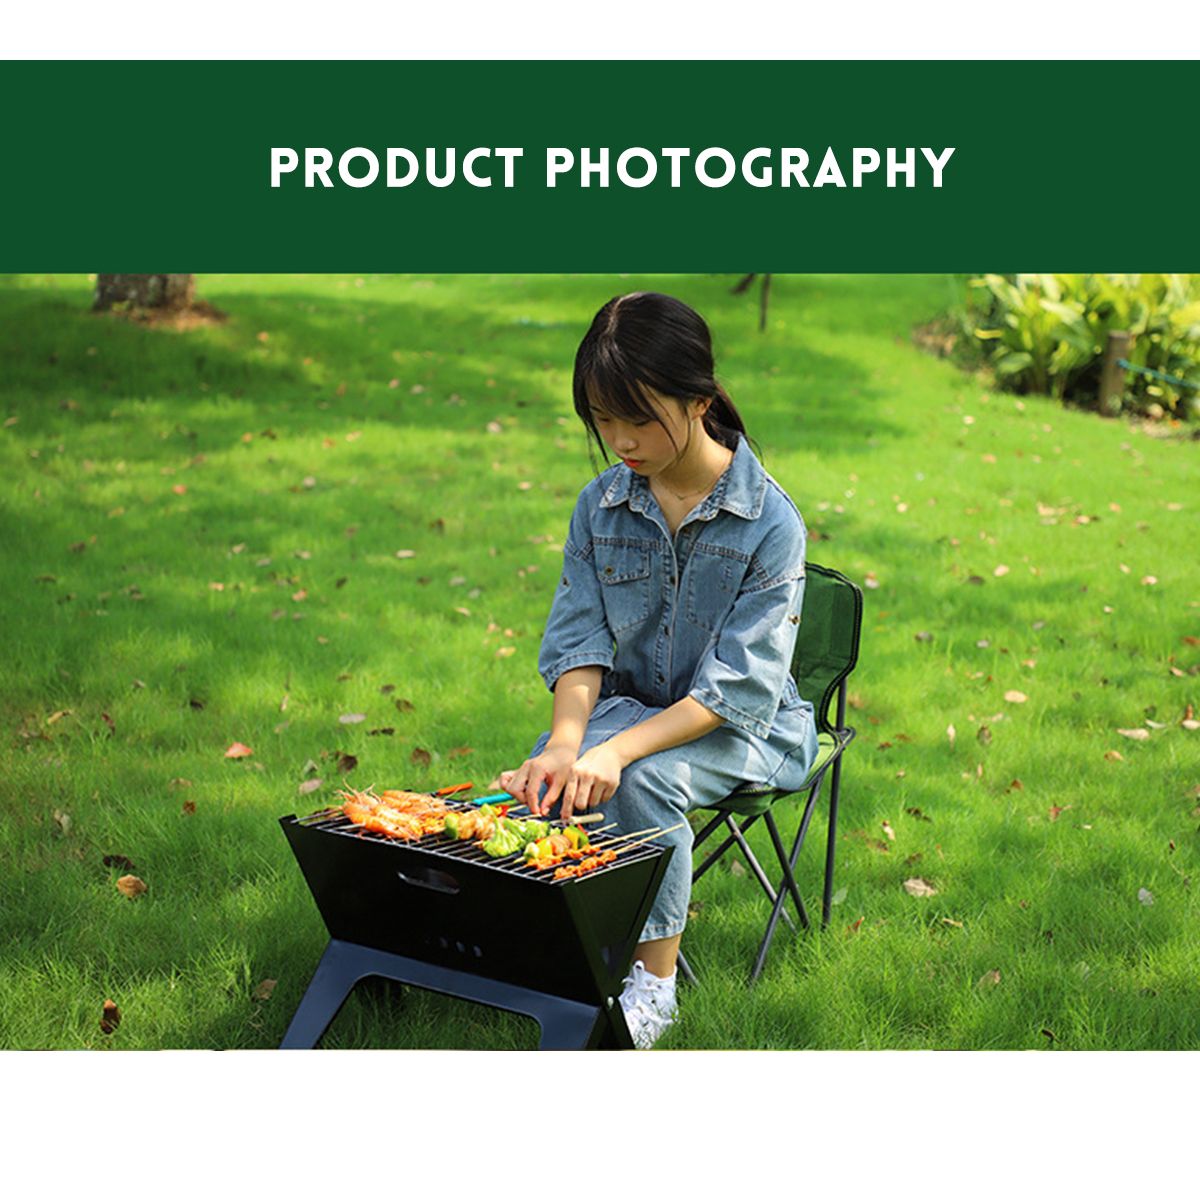 Large-Outdoor-Portable-Foldable-Folding-Charcoal-BBQ-Grill-Camping-Party-Picnic-1595317